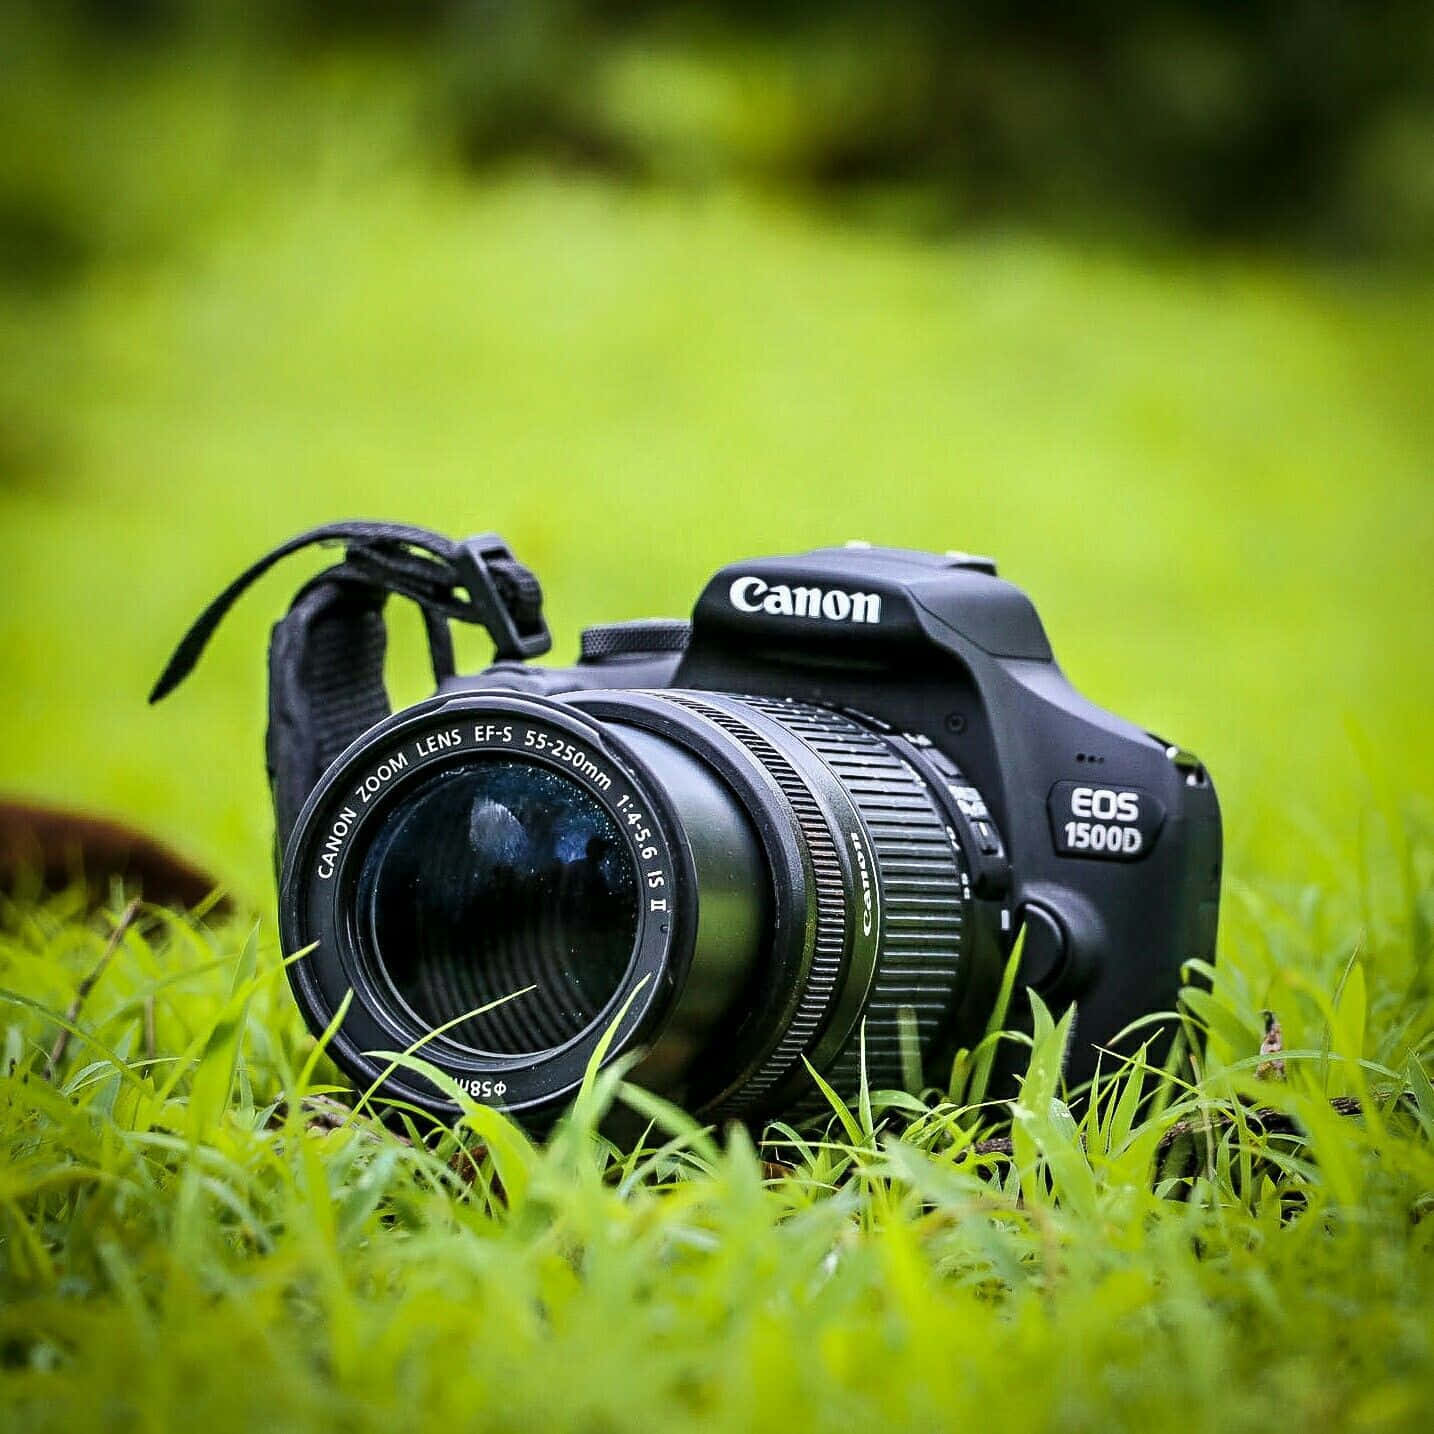 Canon Photography Camera On Grass